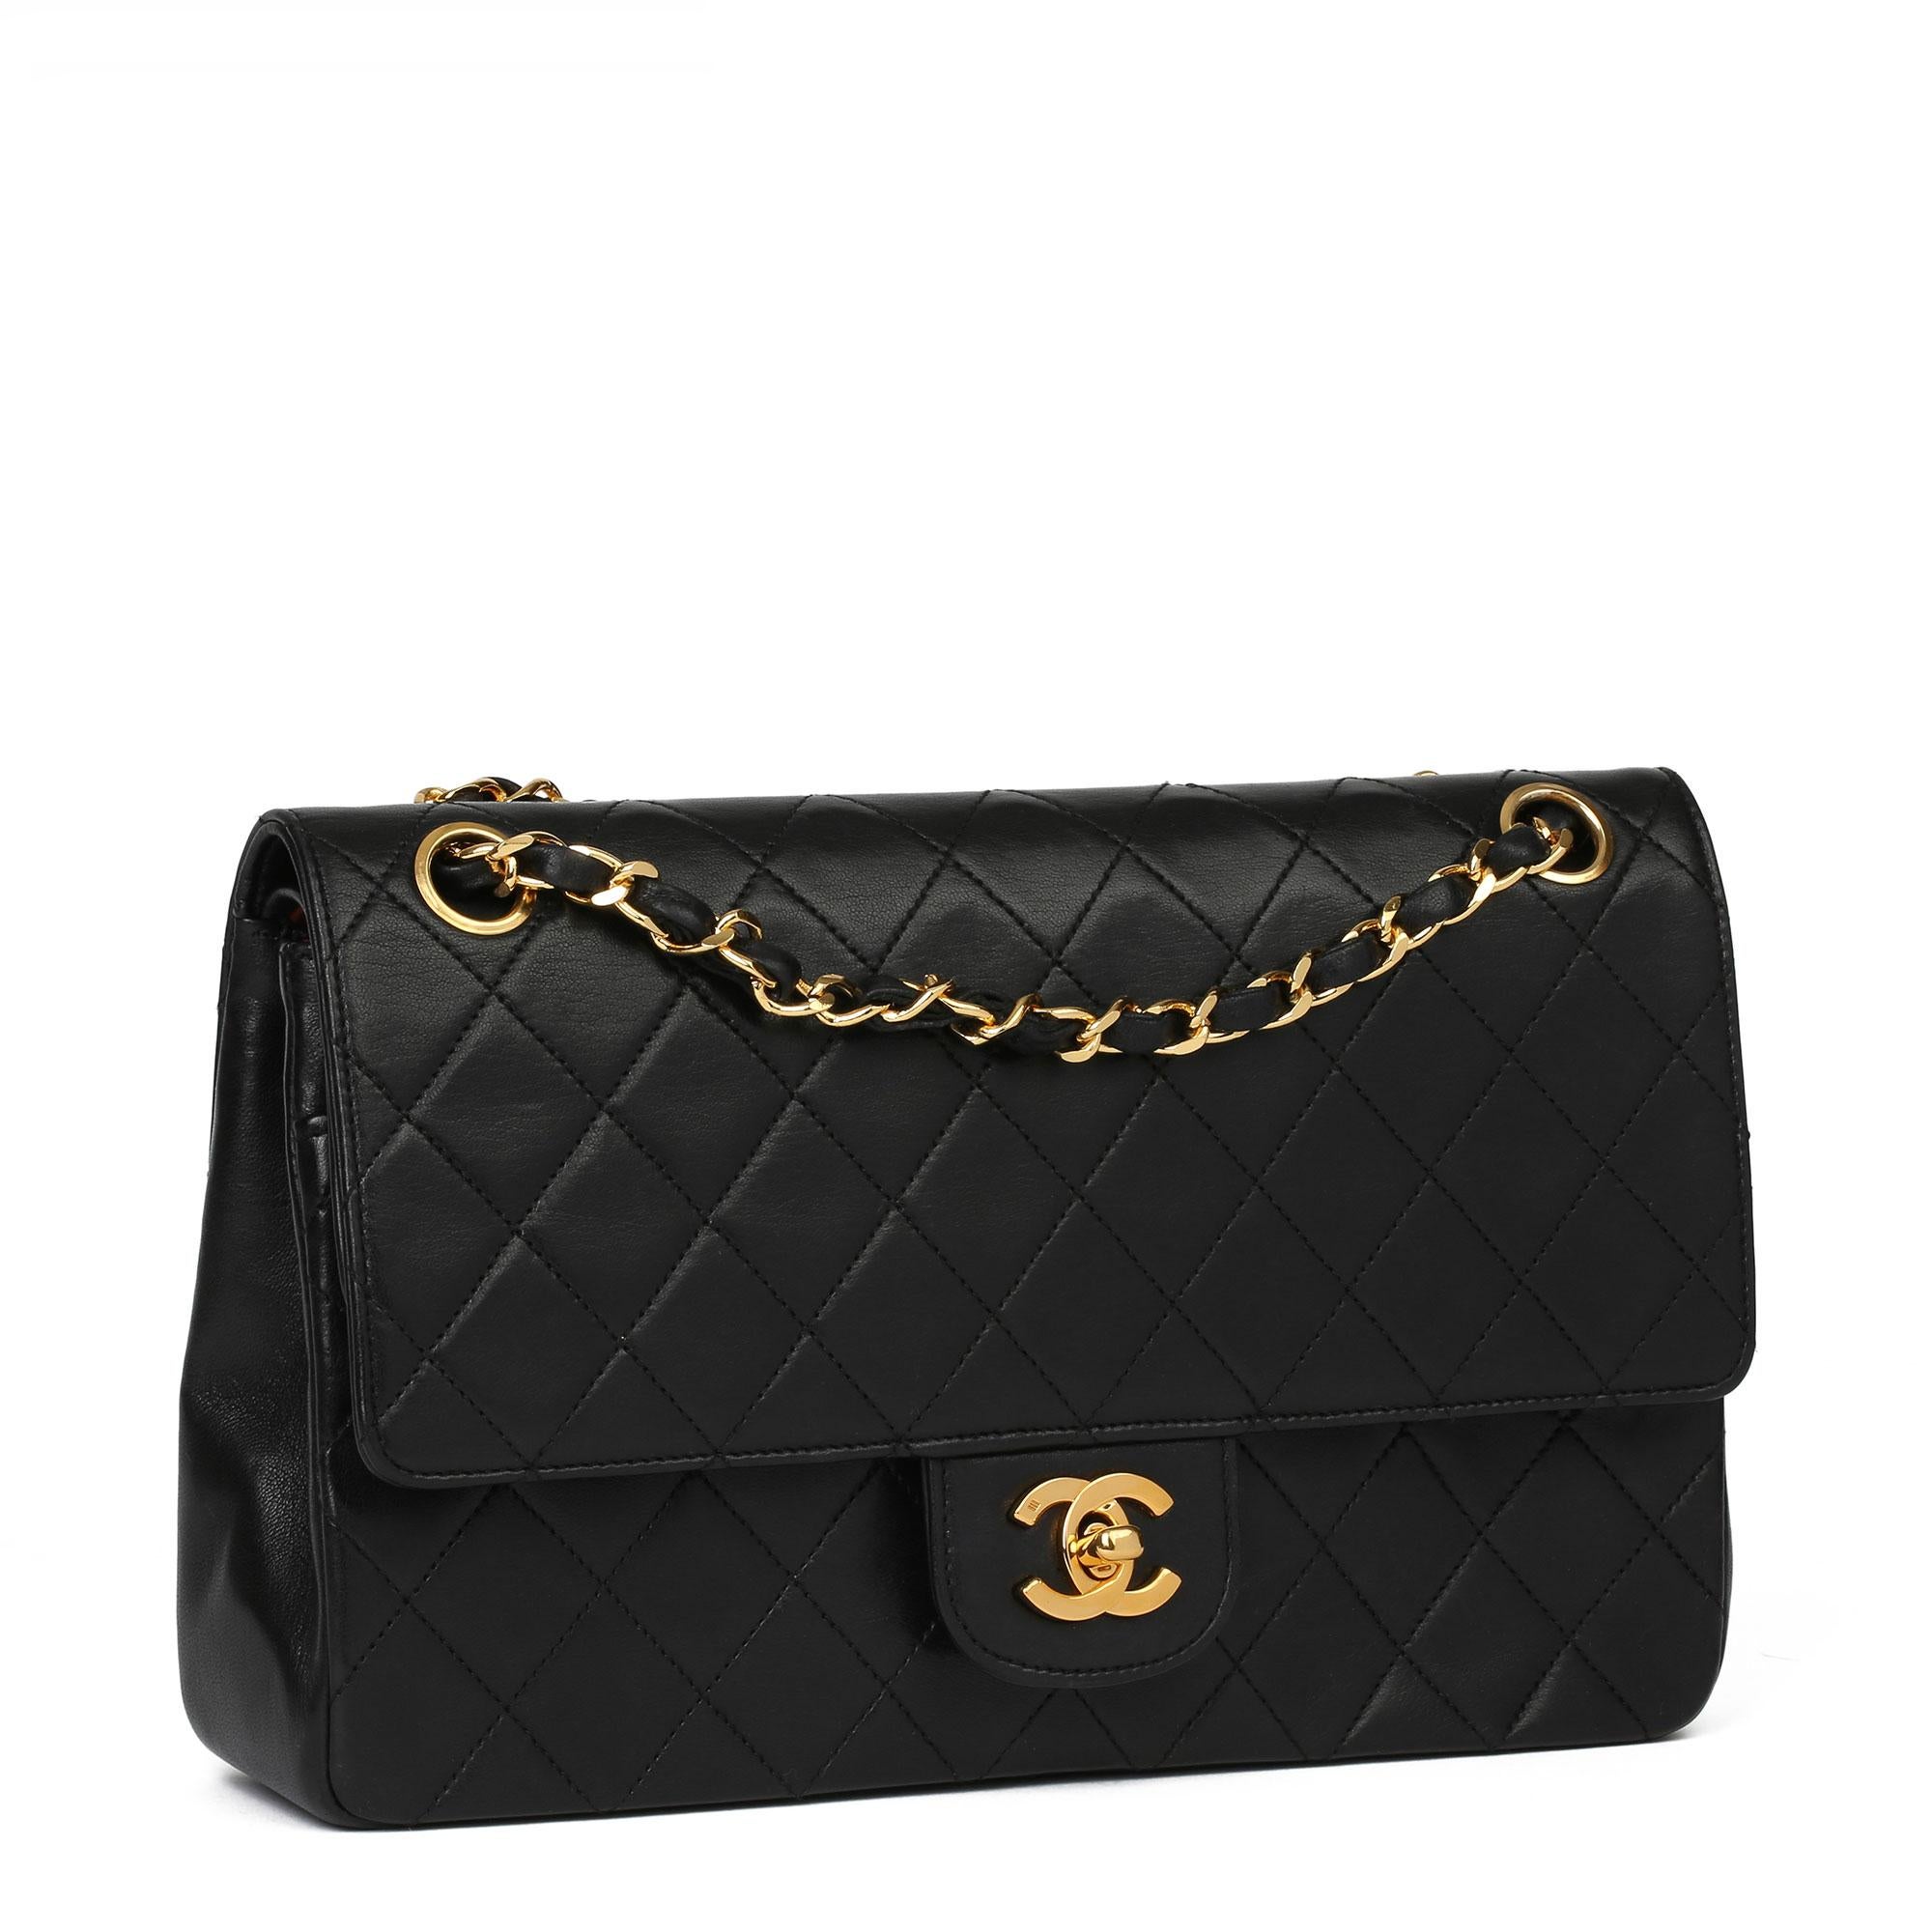 CHANEL
Black Quilted Lambskin Vintage Medium Classic Double Flap Bag 

Xupes Reference: HB3904
Serial Number: 782753
Age (Circa): 1987
Accompanied By: Authenticity Card
Authenticity Details: Serial Sticker (Made in France)
Gender: Ladies
Type: